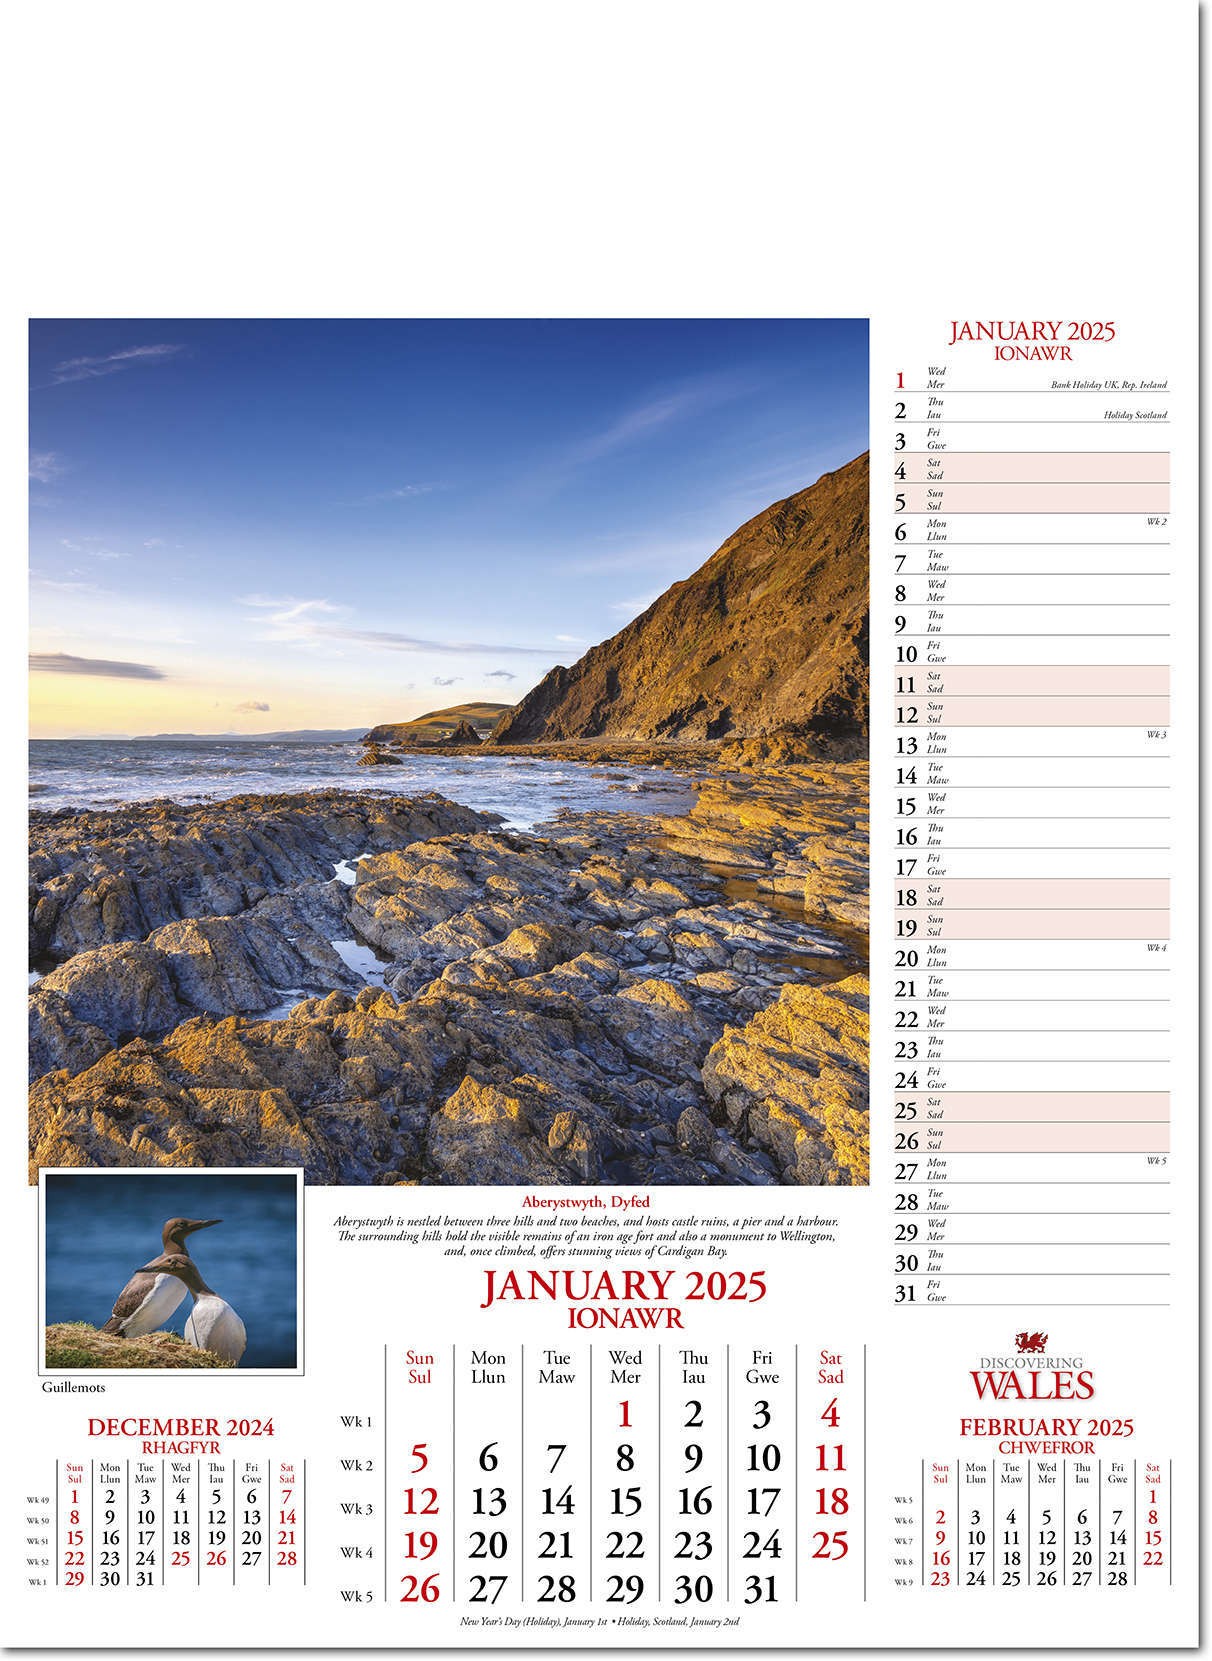 Discovering Wales Calendar